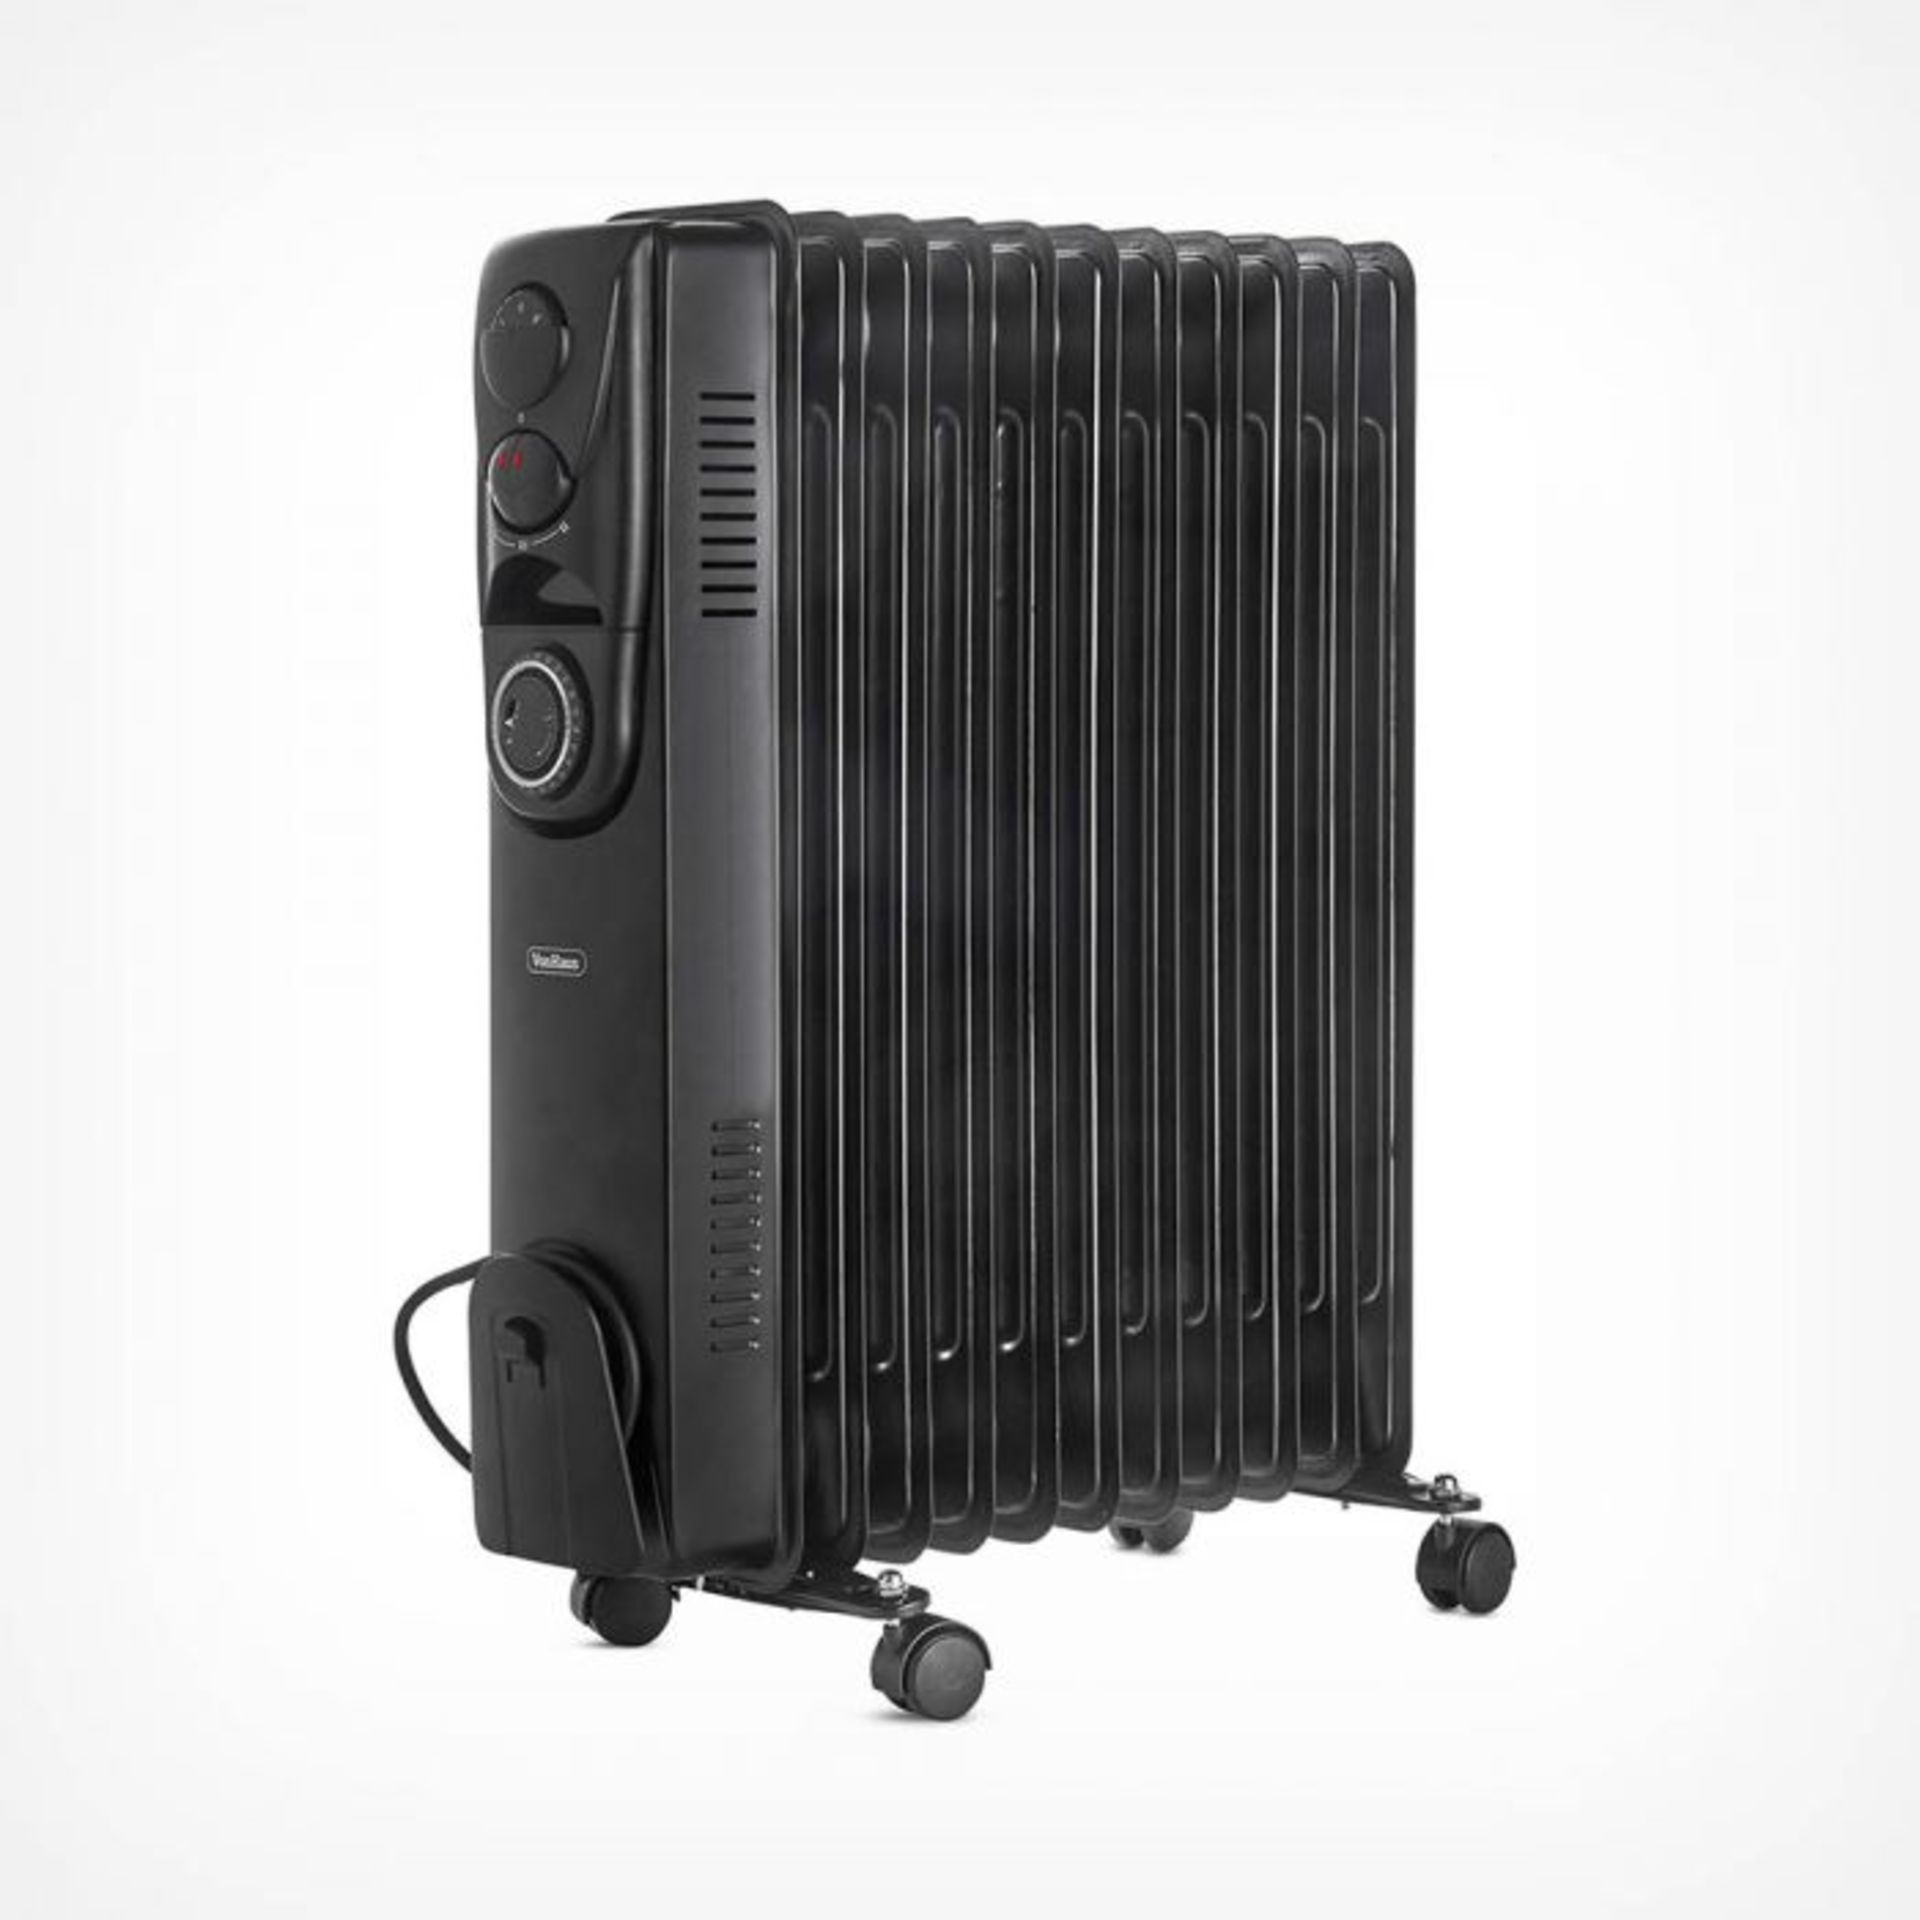 (S80) 11 Fin 2500W Oil Filled Radiator - Black 2500W radiator with 11 oil-filled fins for heat... - Image 3 of 3